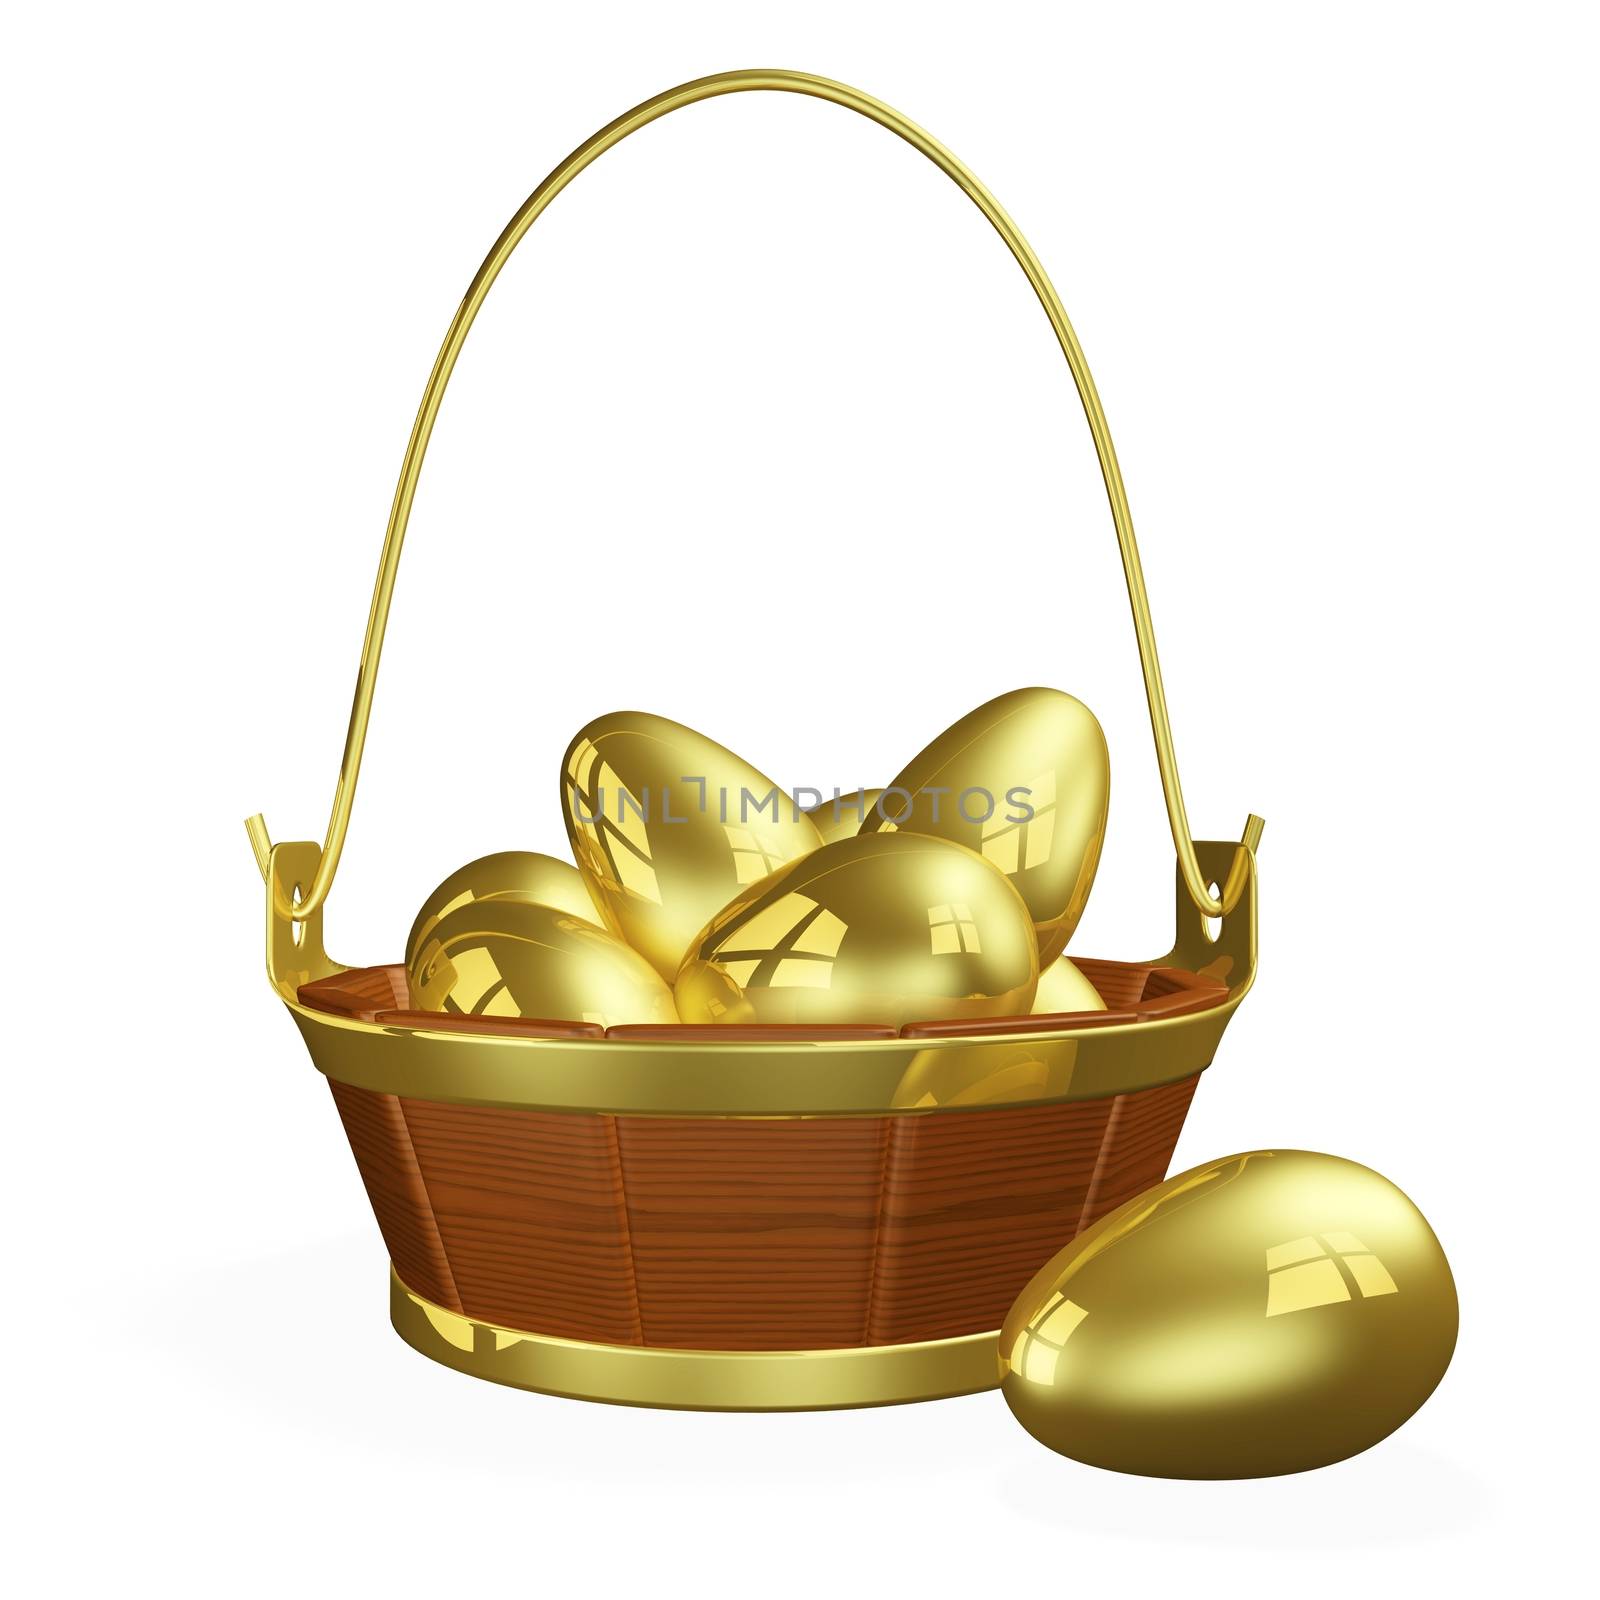 Basket Full of Gold Eggs by RichieThakur